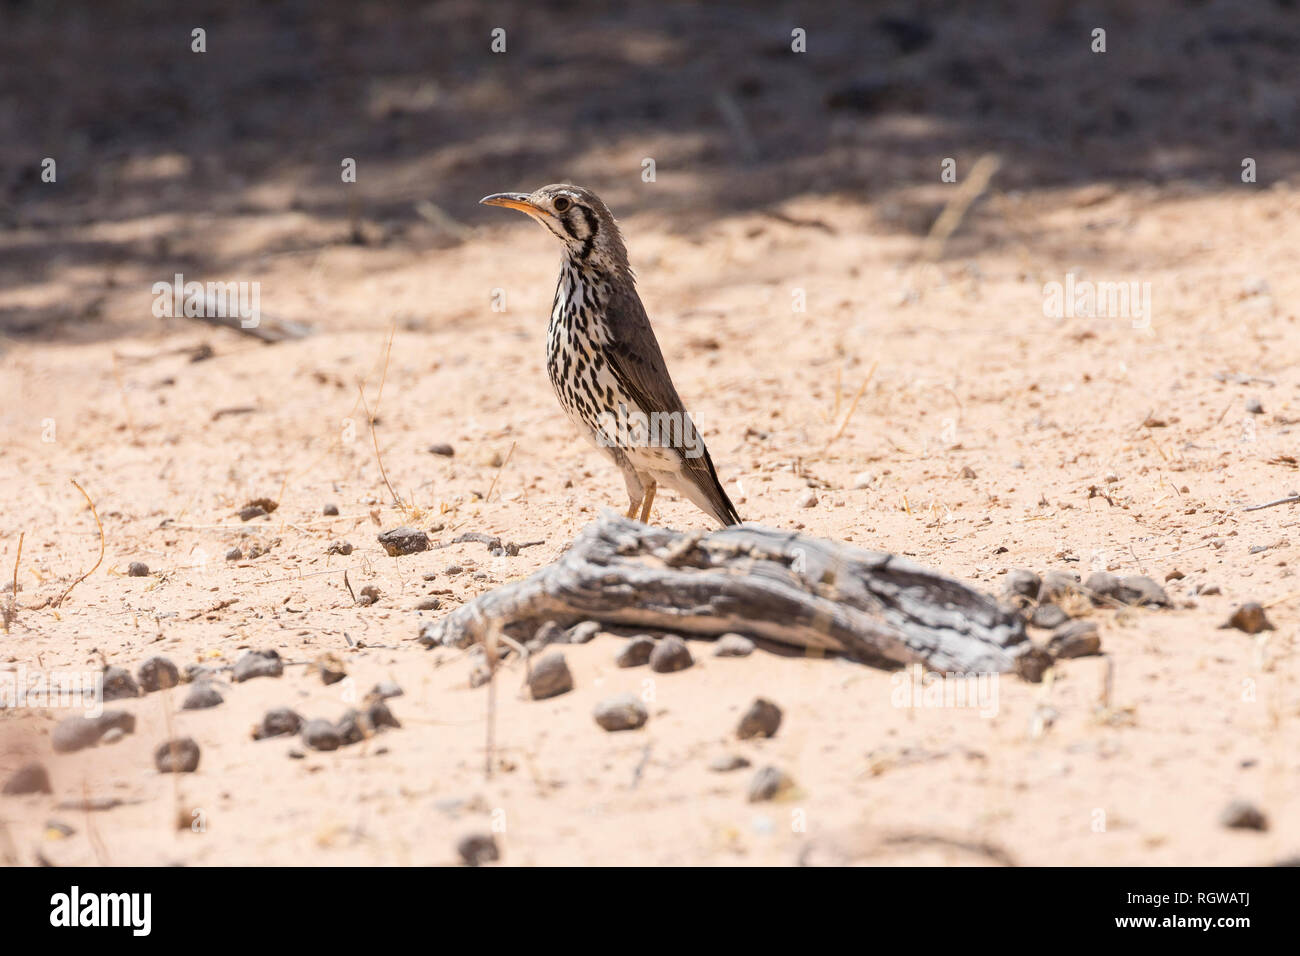 Groundscraper Thrush, Psophocichla litsitsirupa in Kgalagadi Transfrontier, Park, Northern Cape, South Africa in spring on the ground. Stock Photo